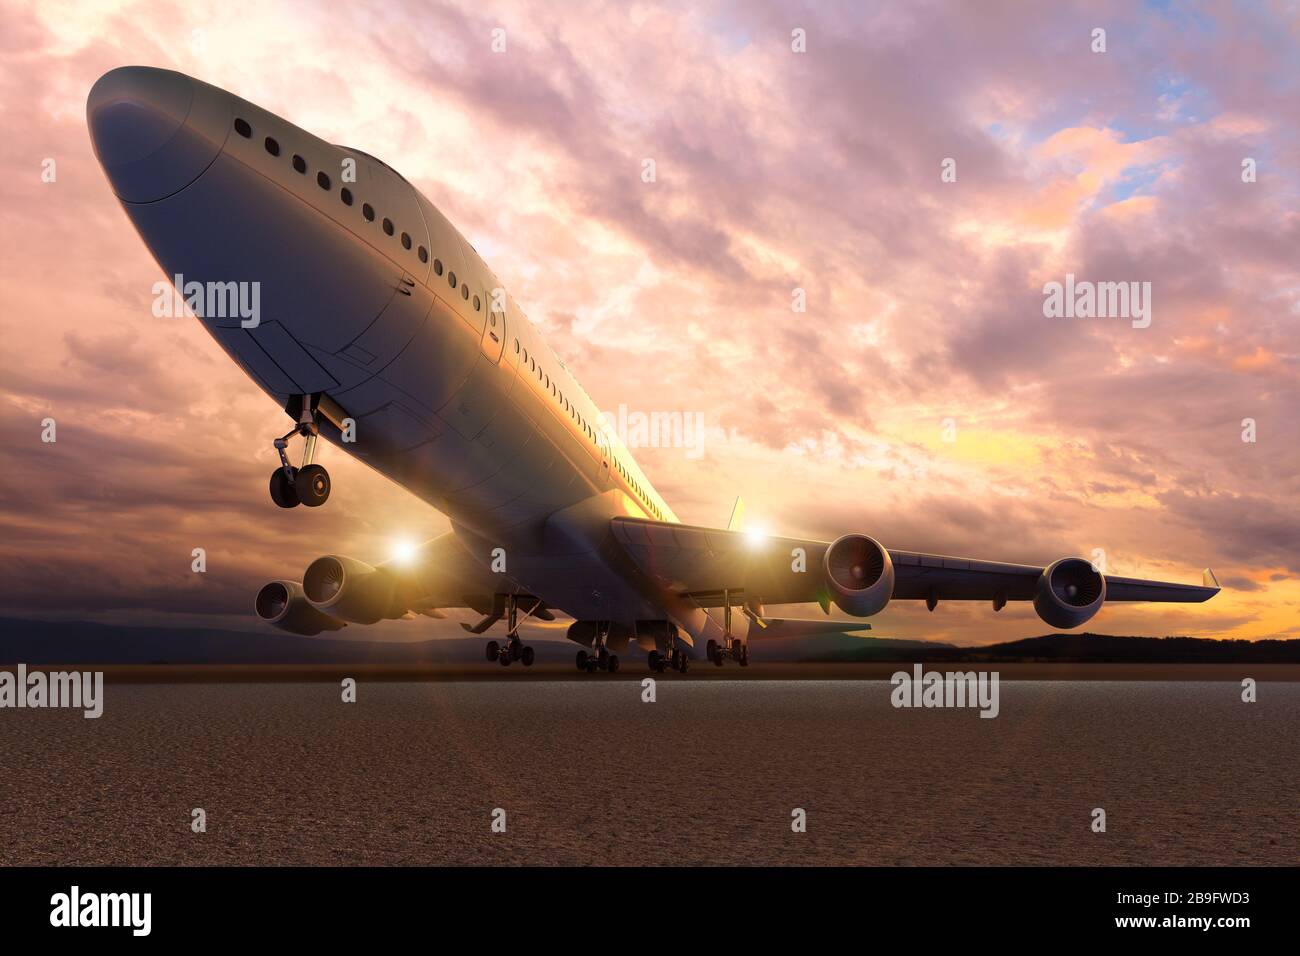 3D rendering of an airplane take-off / Landing at sunset Stock Photo